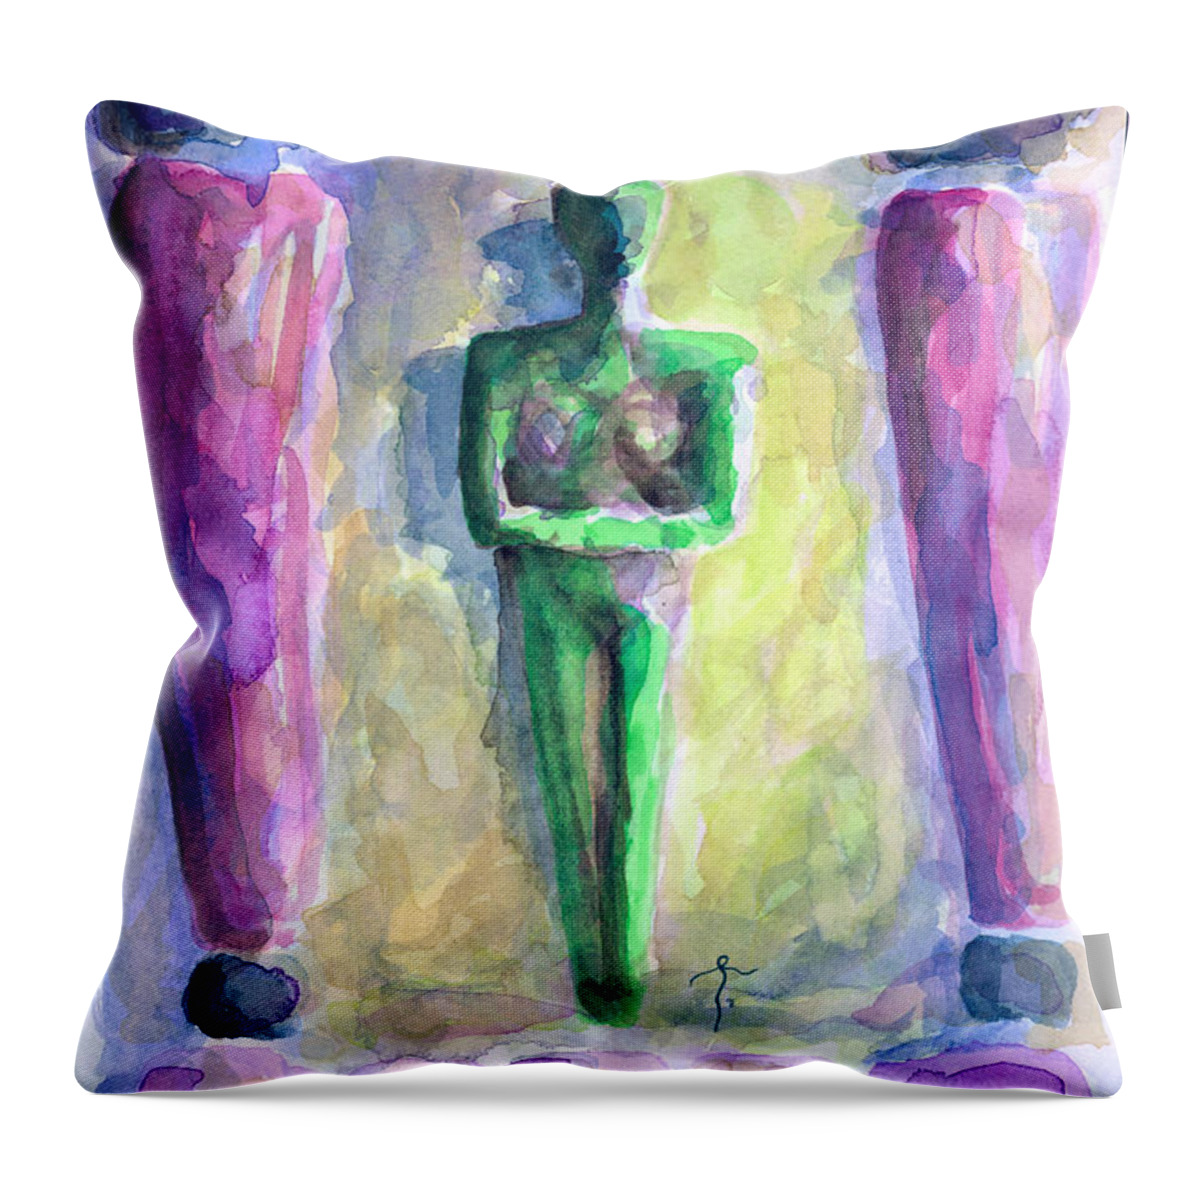 Painting Throw Pillow featuring the painting . by James Lanigan Thompson MFA